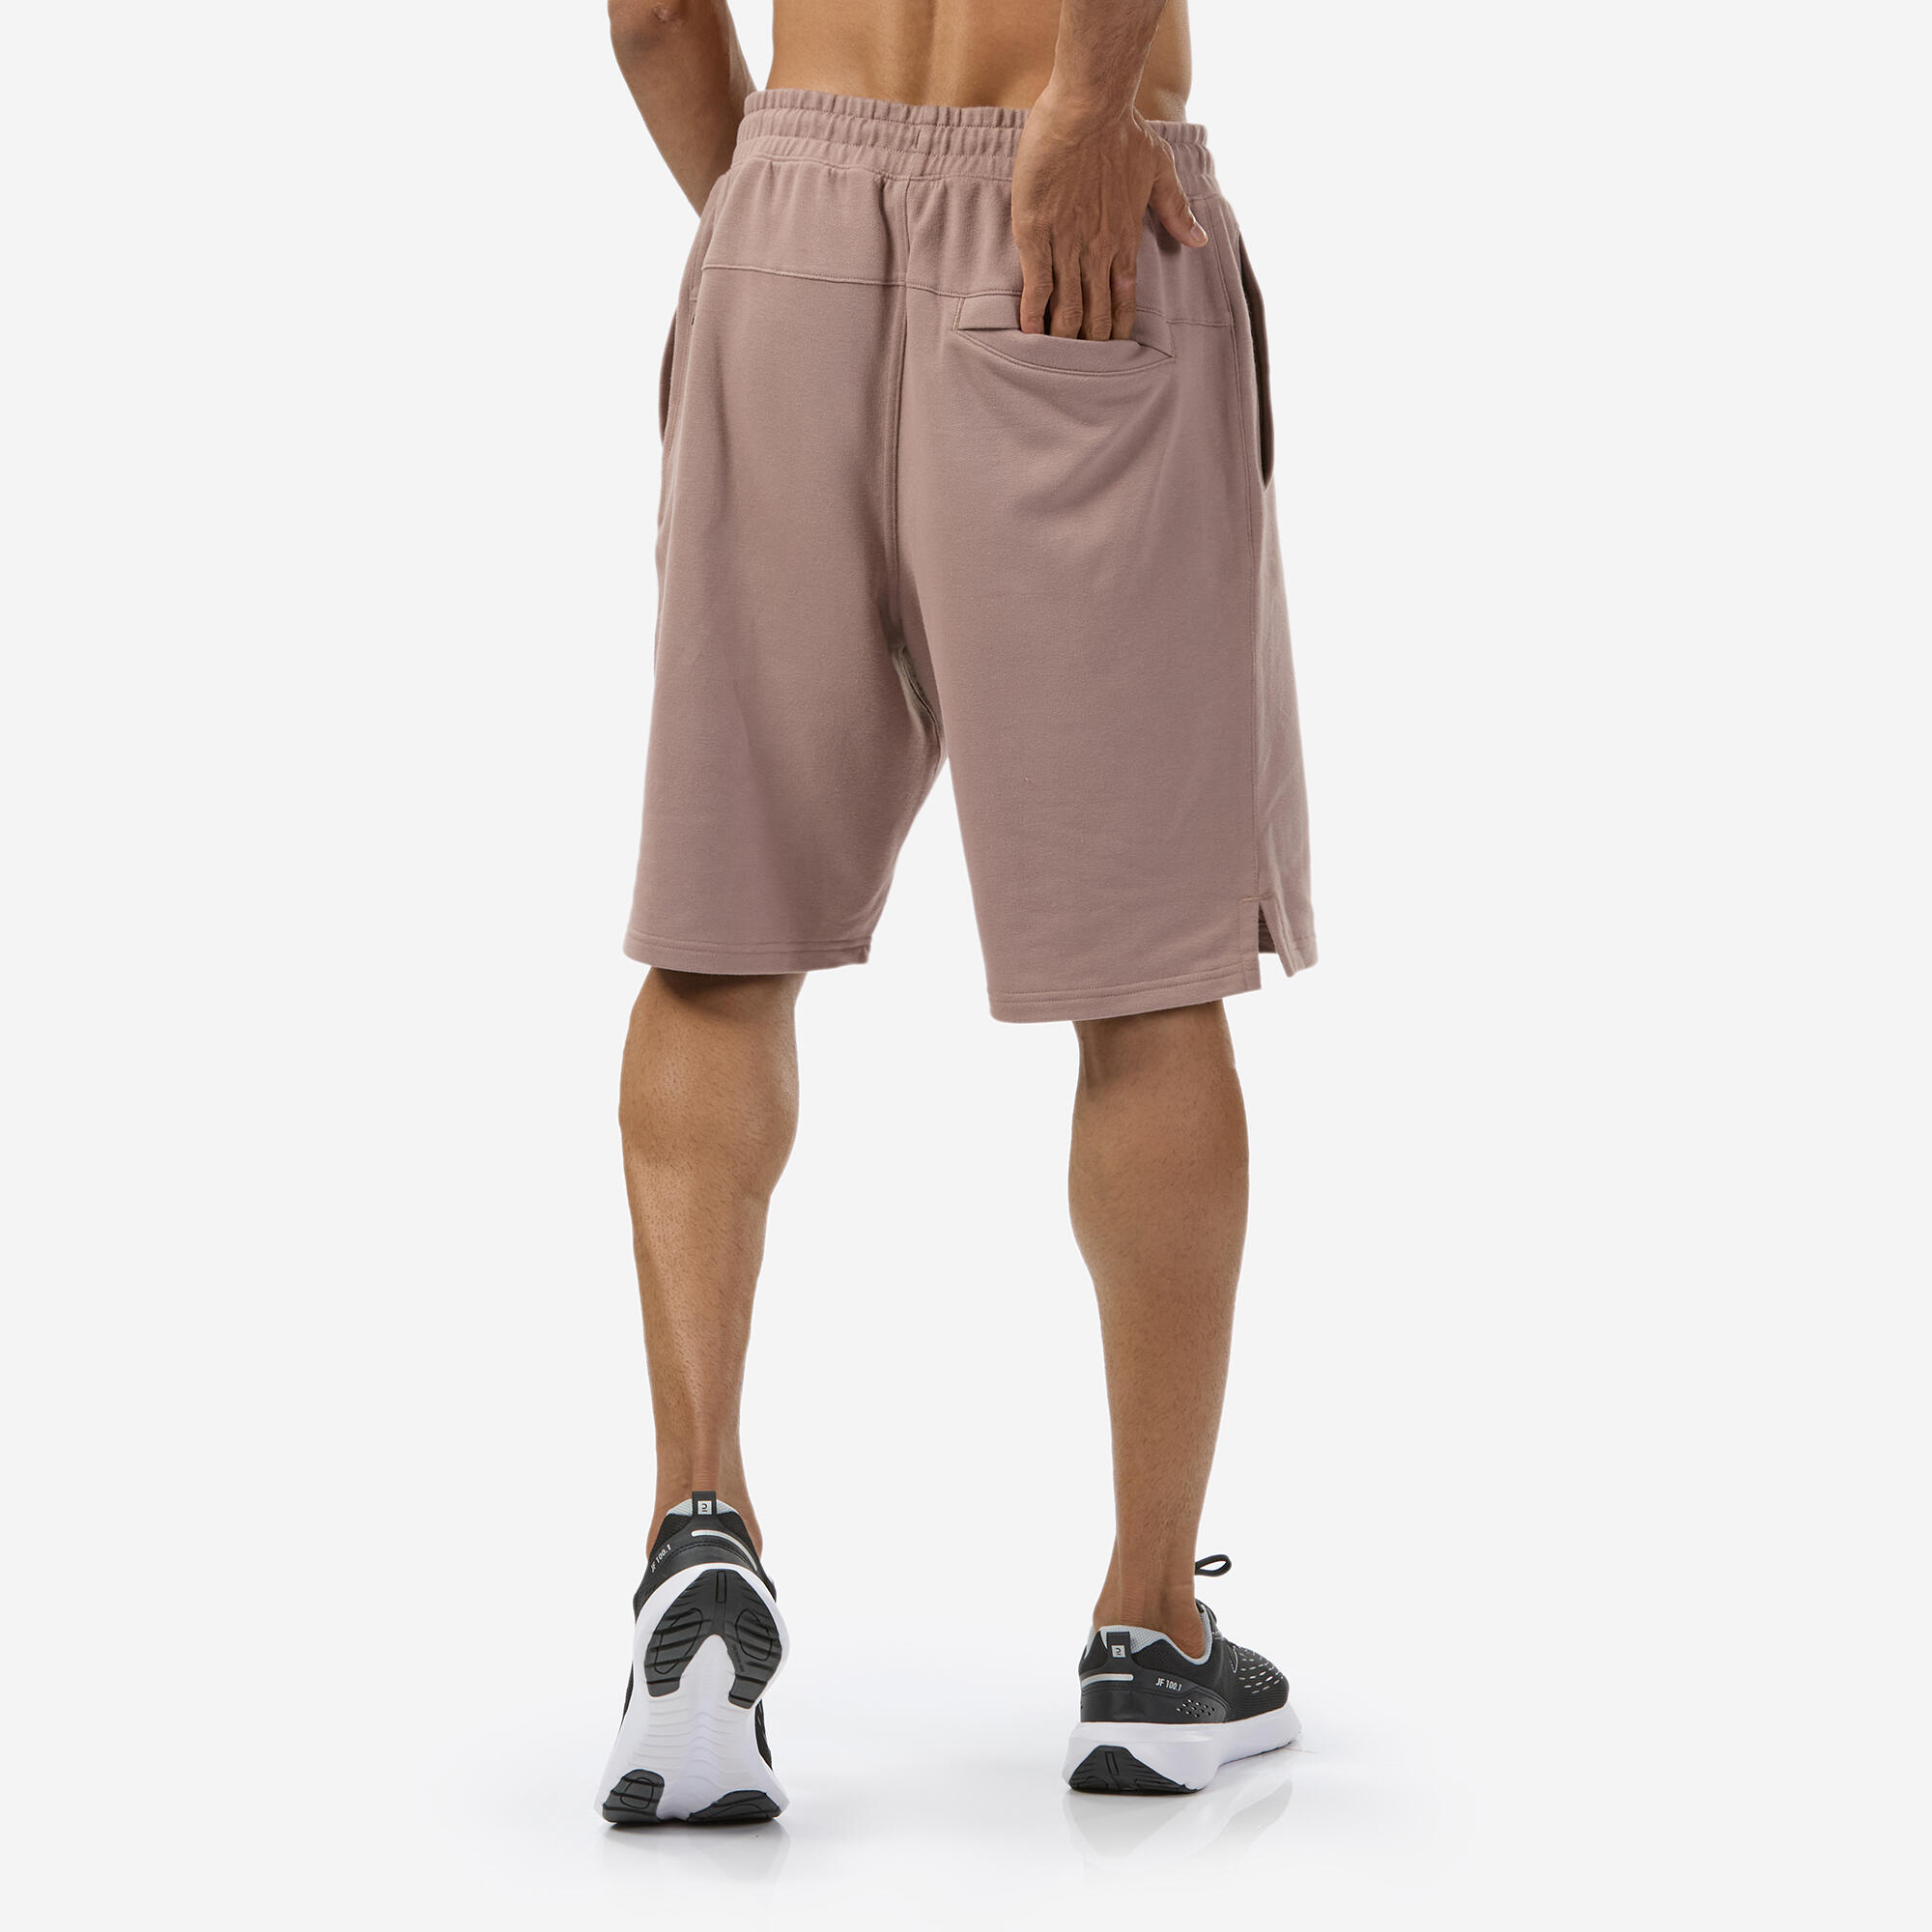 Men's Fitness Shorts - Frost Brown 3/7